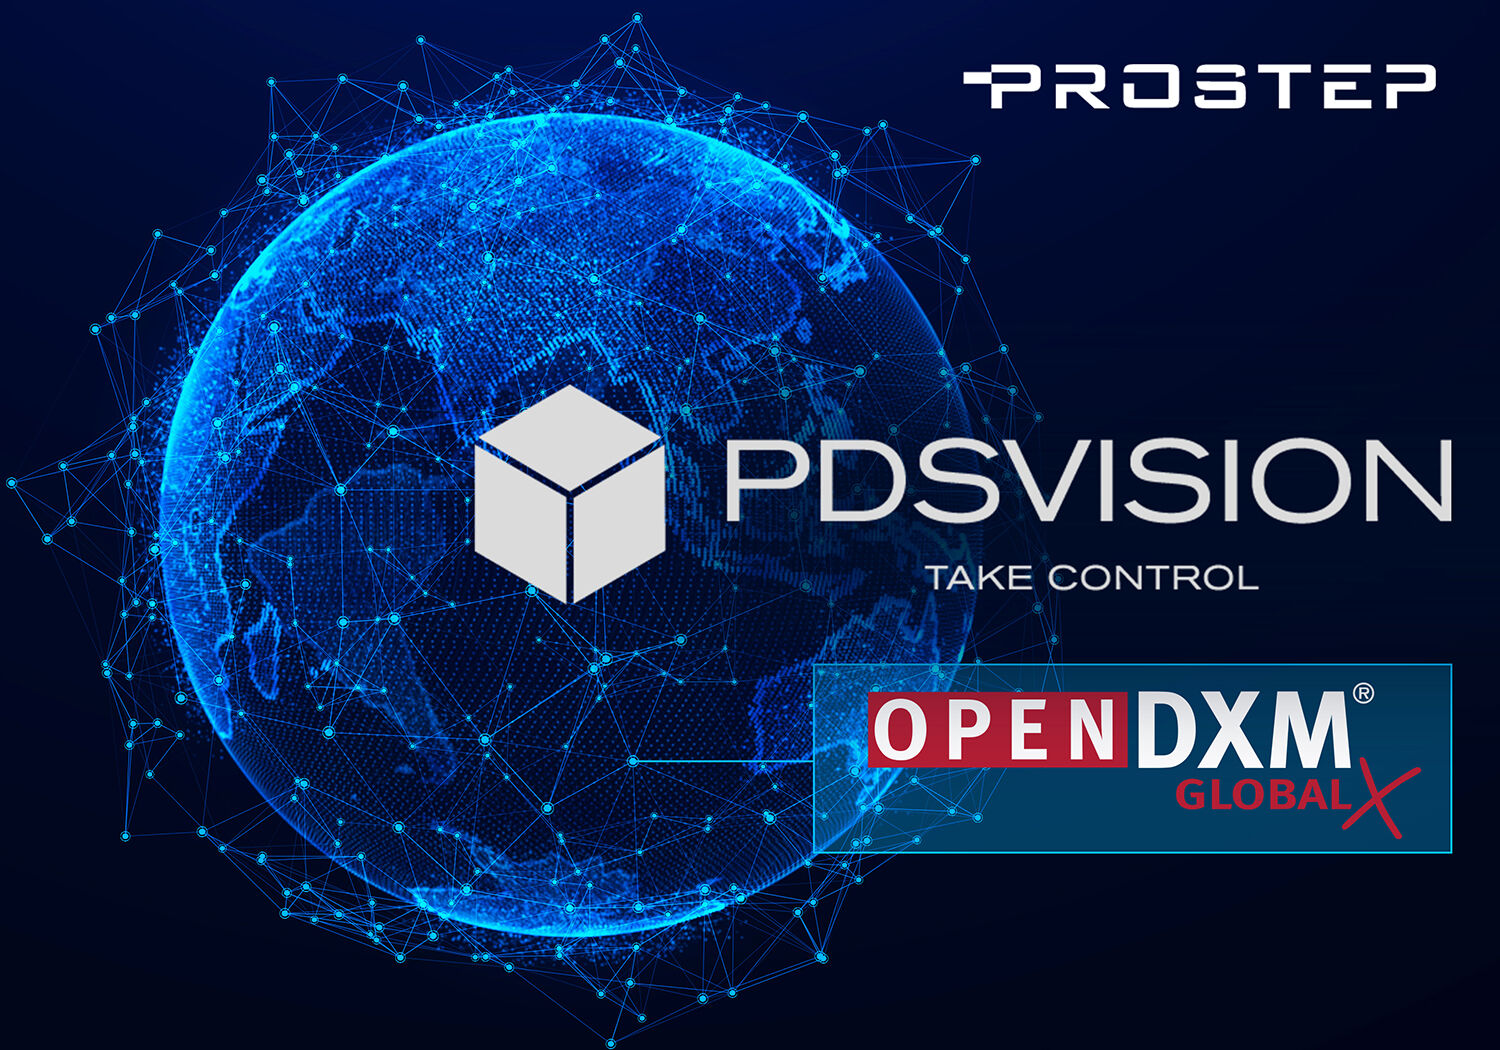 PDSVISION PROSTEP